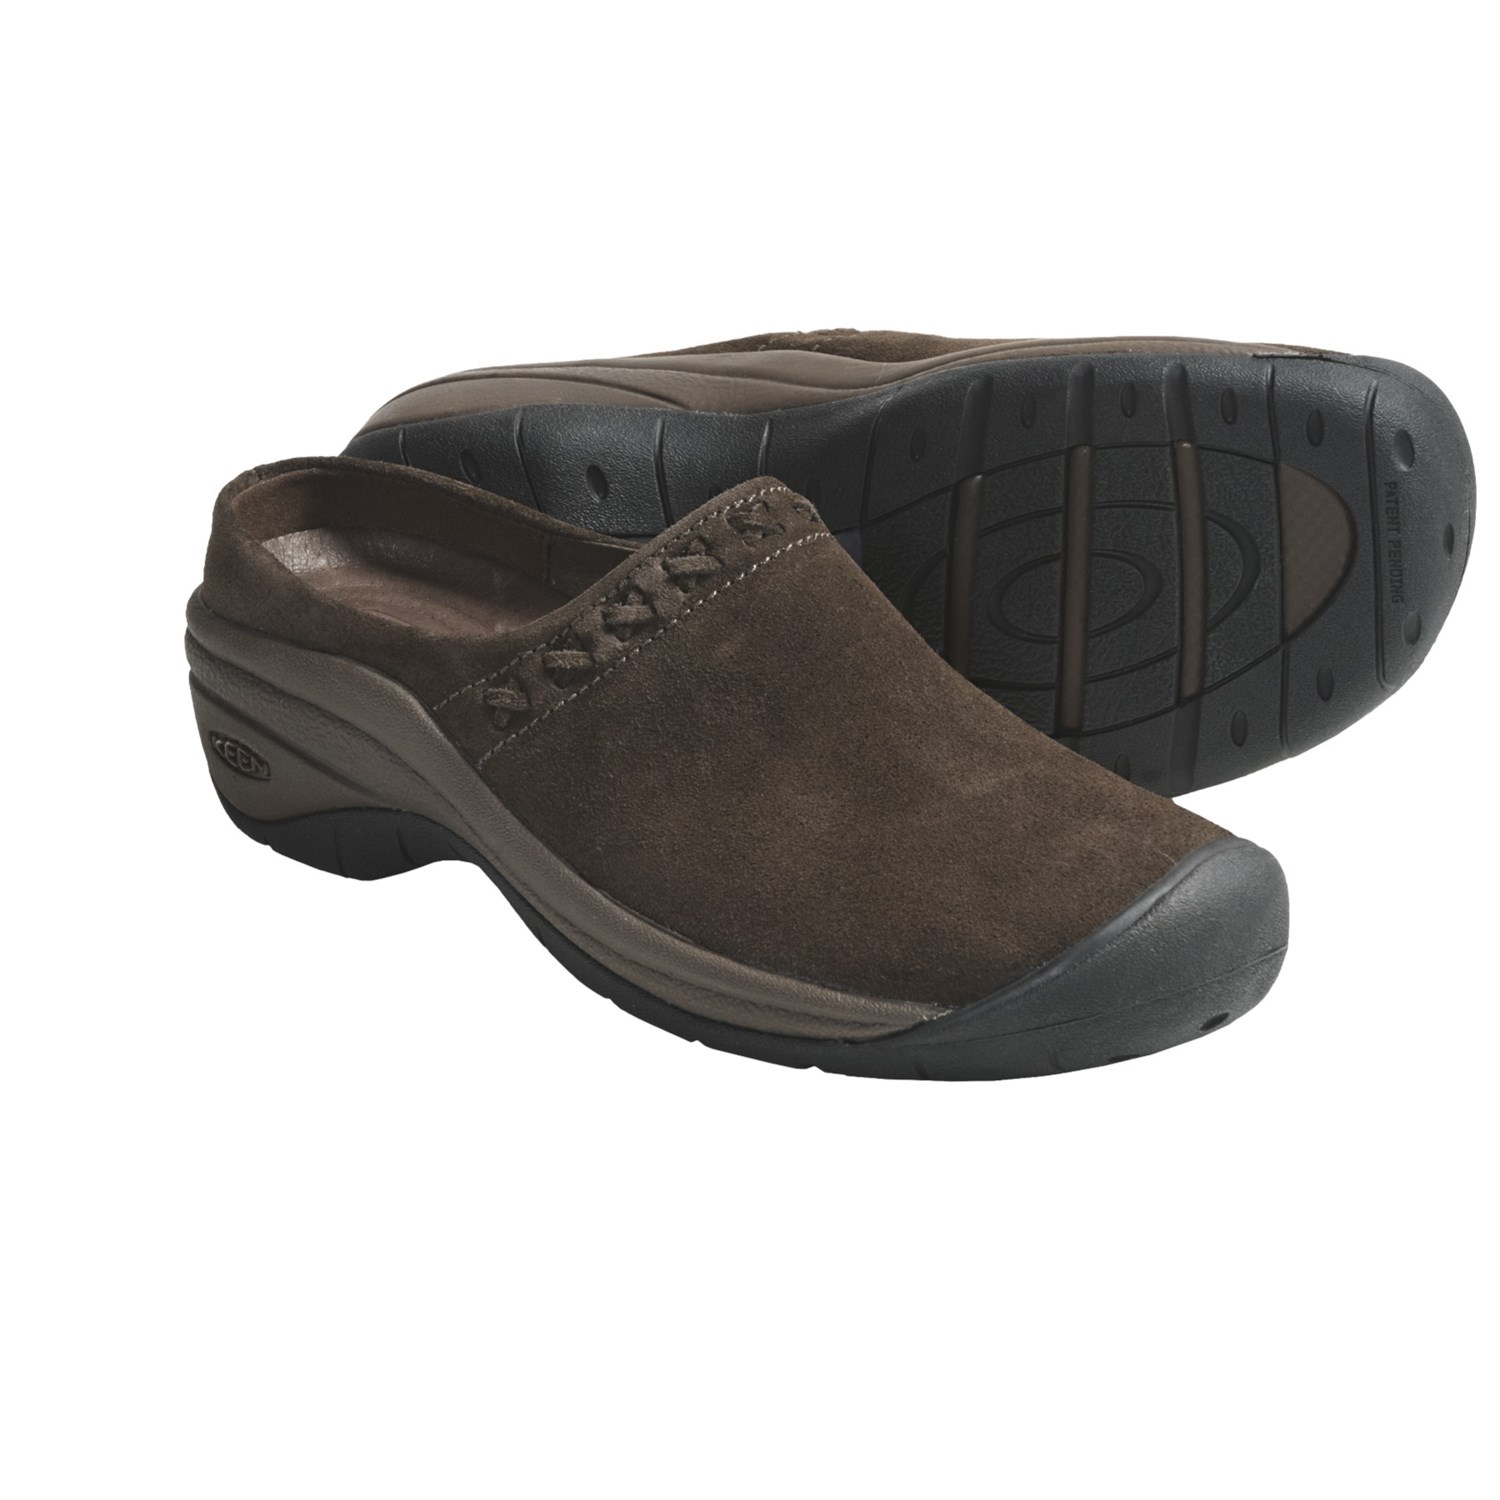 Keen Chambers Clogs - Suede (For Women) in Slate Black